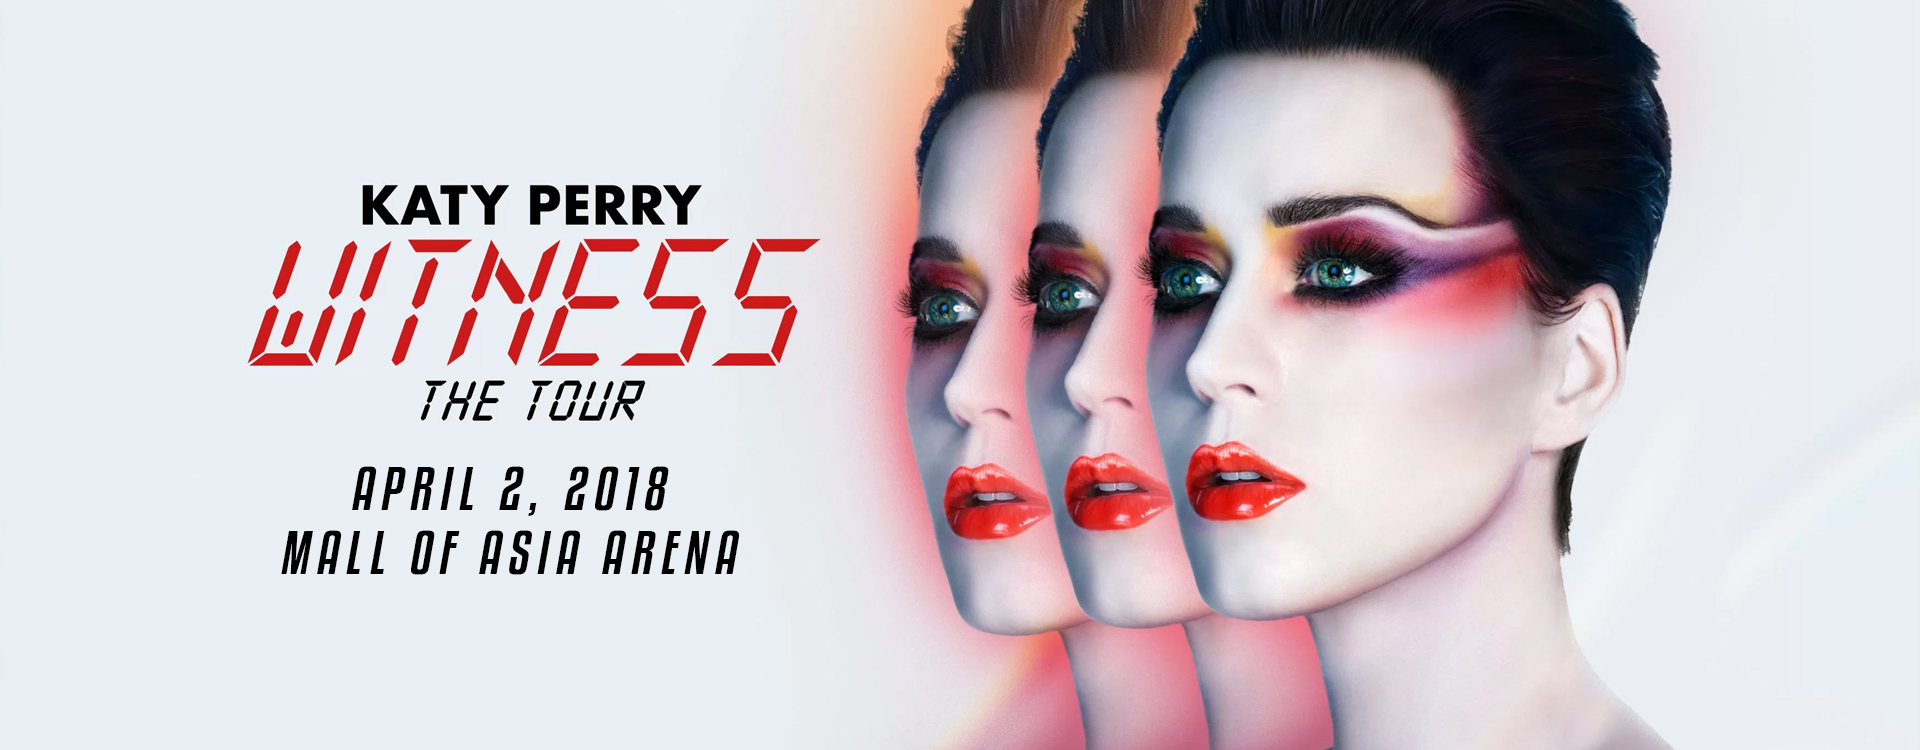 monster-concerts-2018-katy-perry-is-a-monster